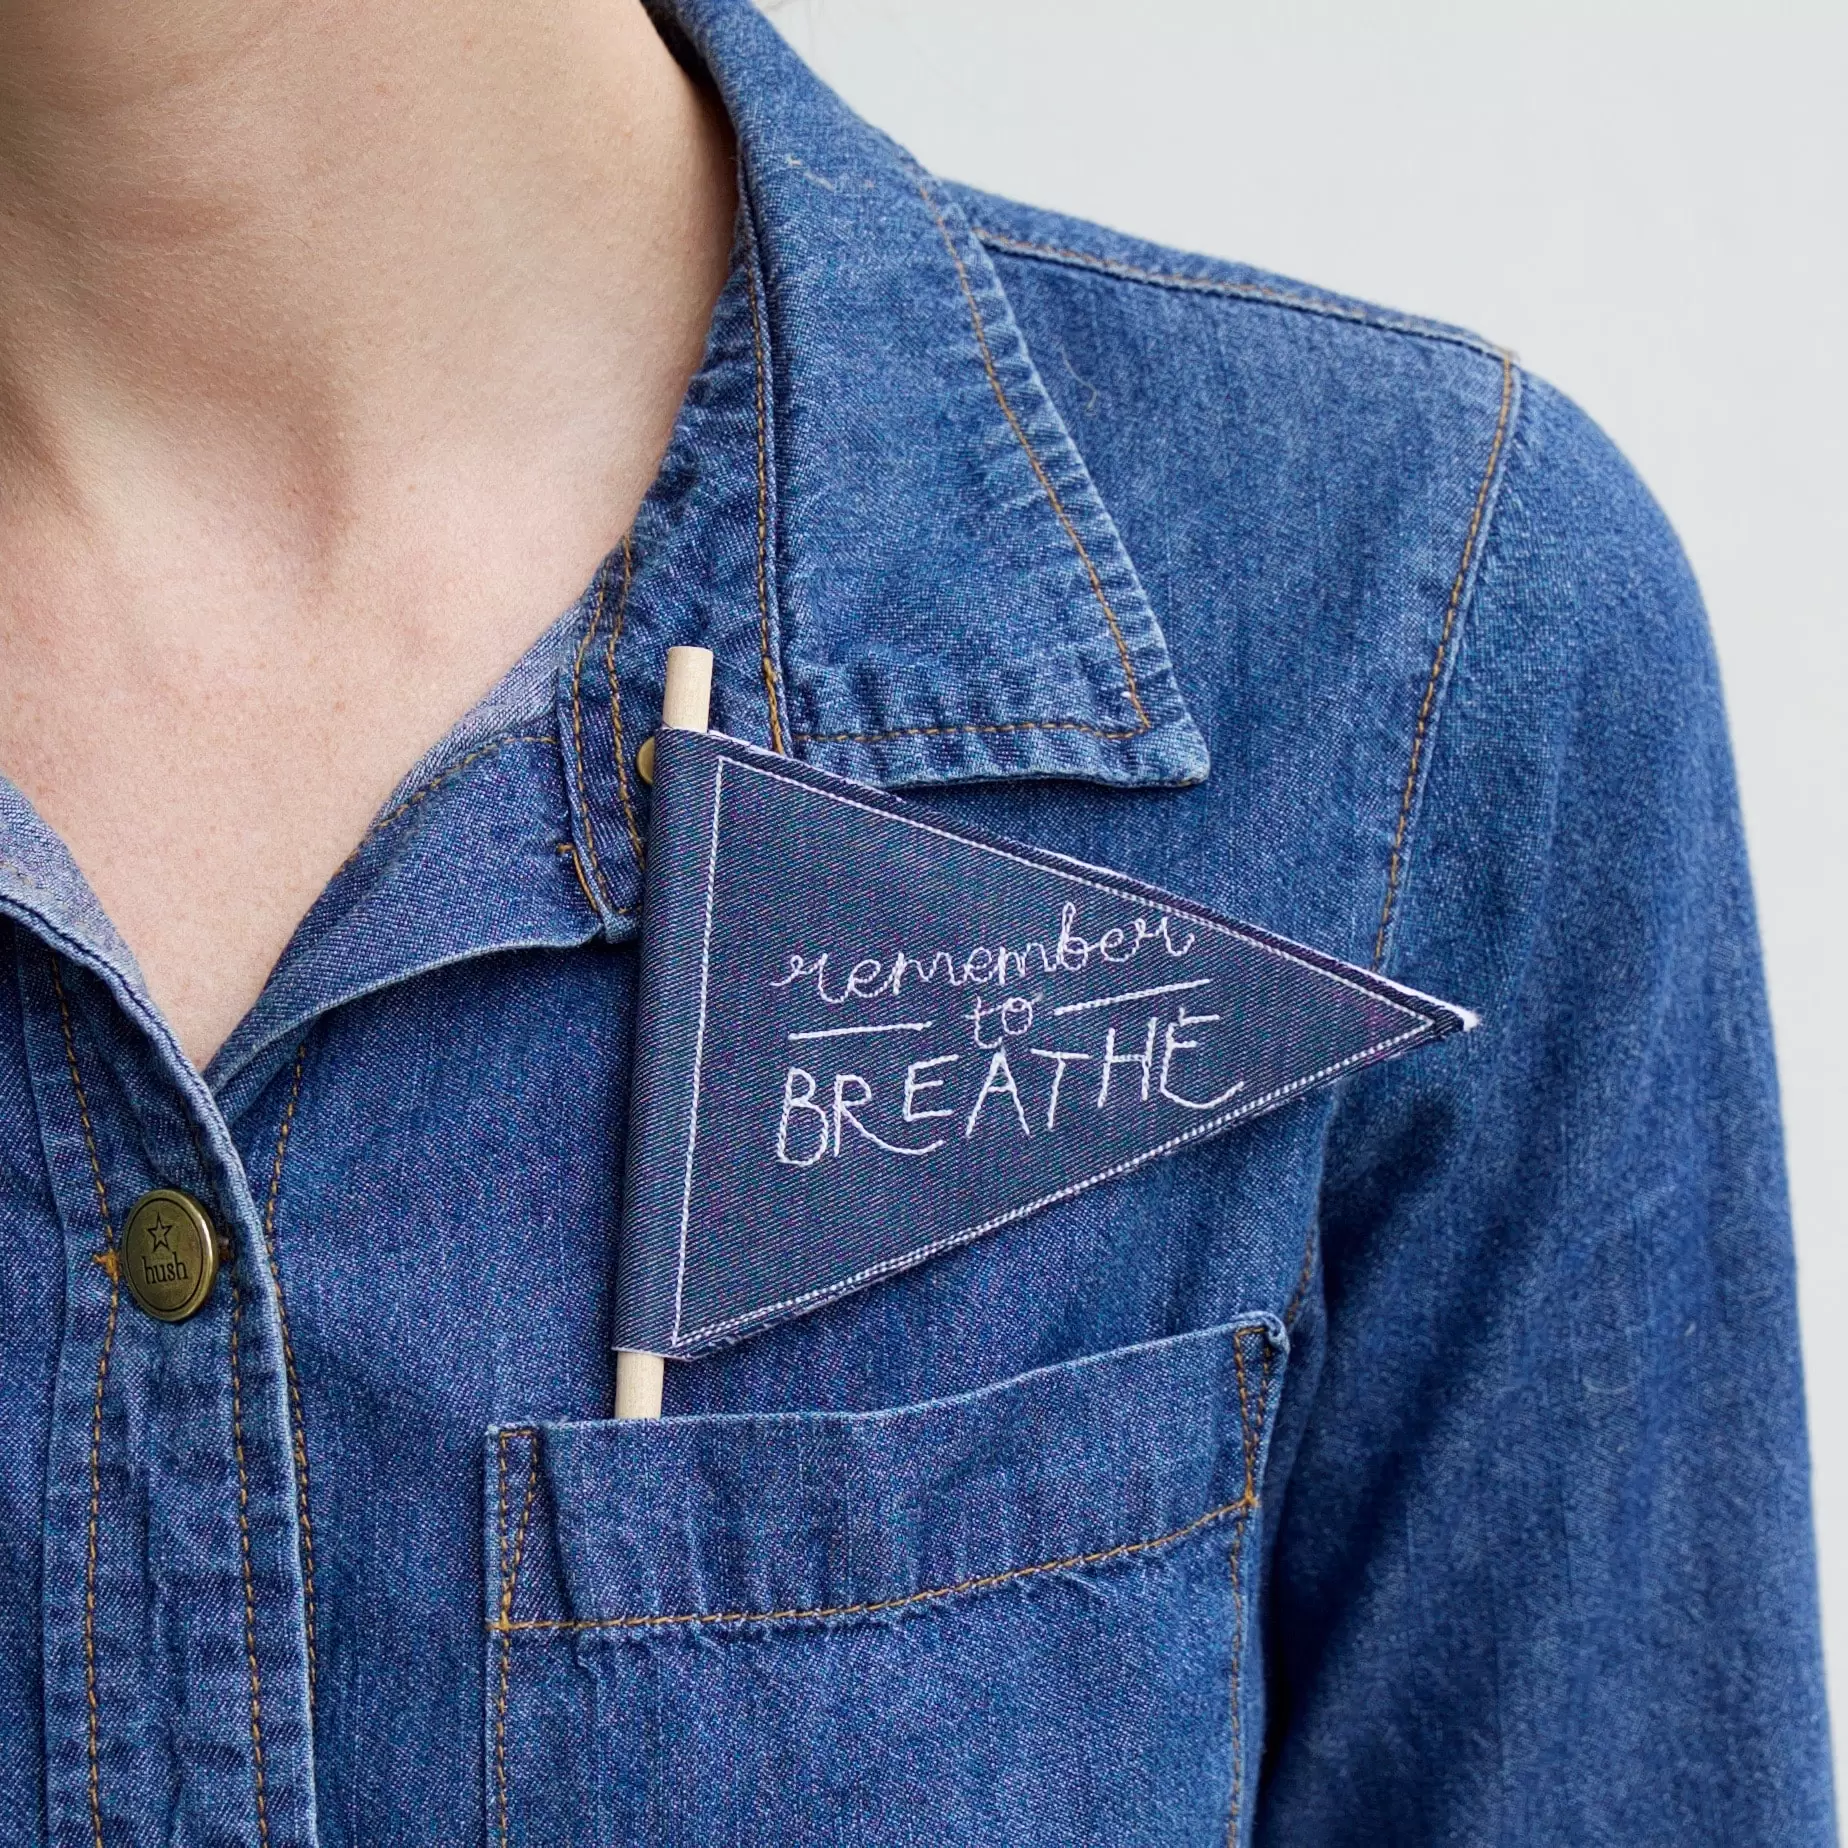 Woman wearing denim shirt with remember to breathe pennant in top pocket